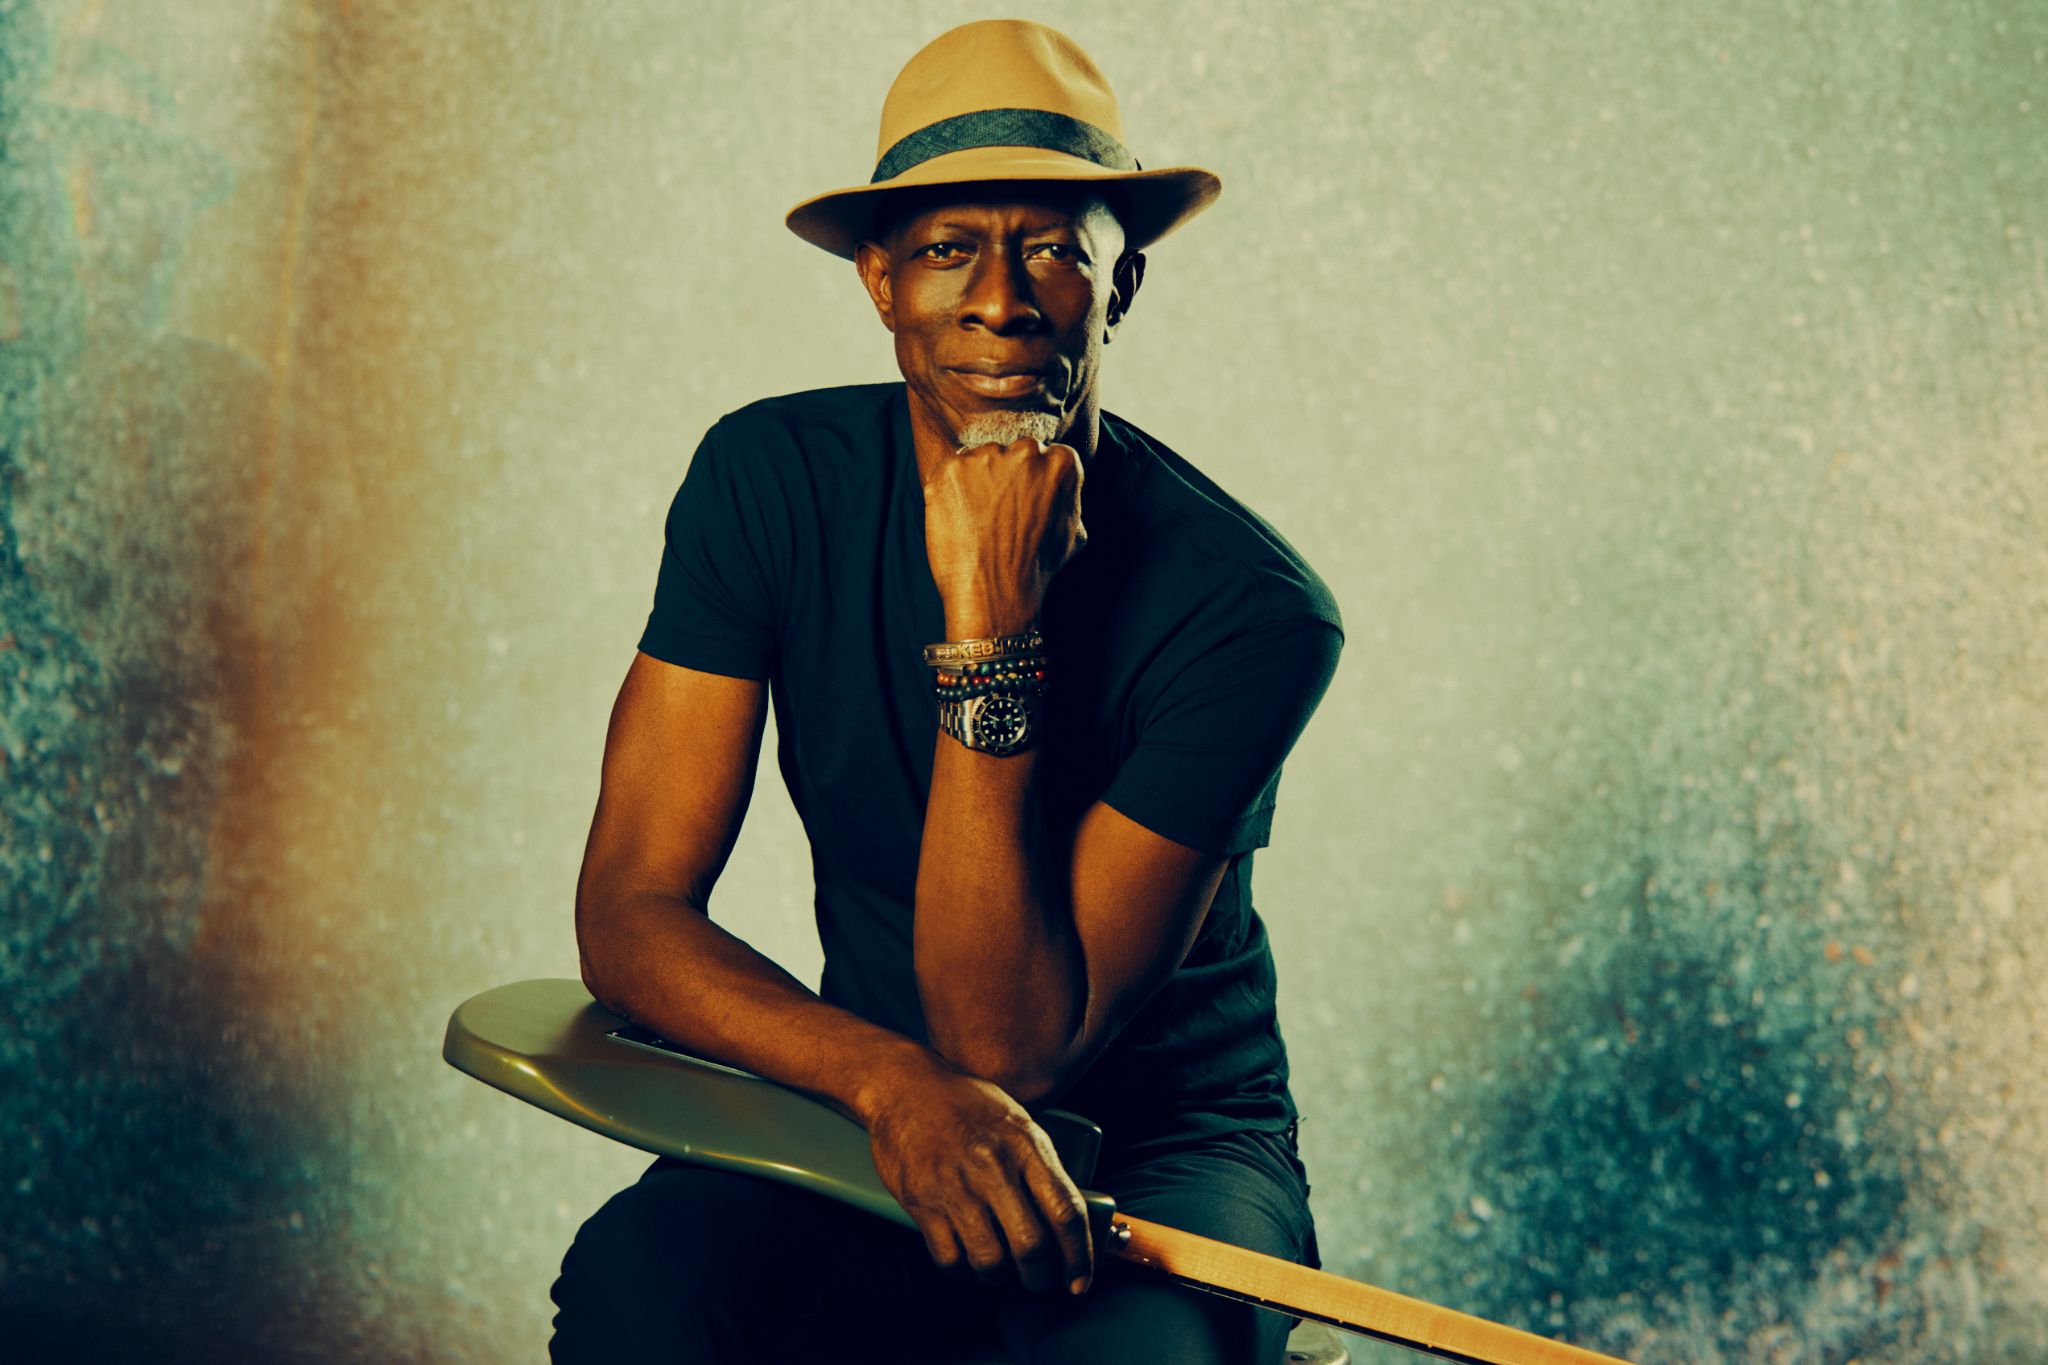 Keb’ Mo’ Releases Performance Video of “Marvelous To Me” From New Album 'Good To Be' Out Now via Rounder Records